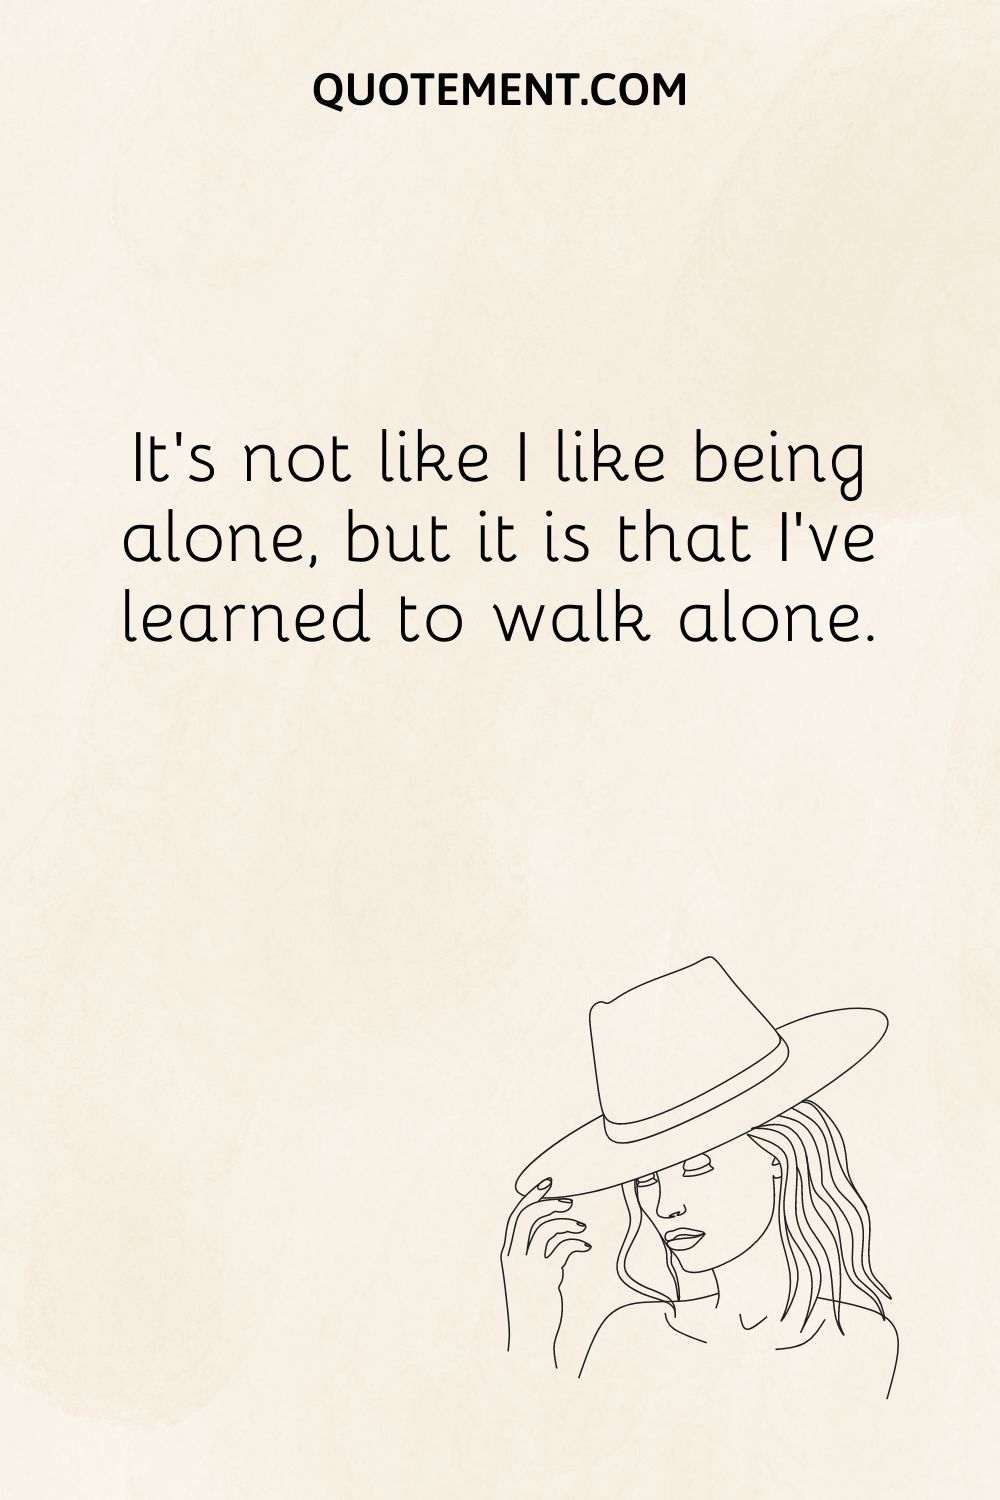 It’s not like I like being alone, but it is that I’ve learned to walk alone.